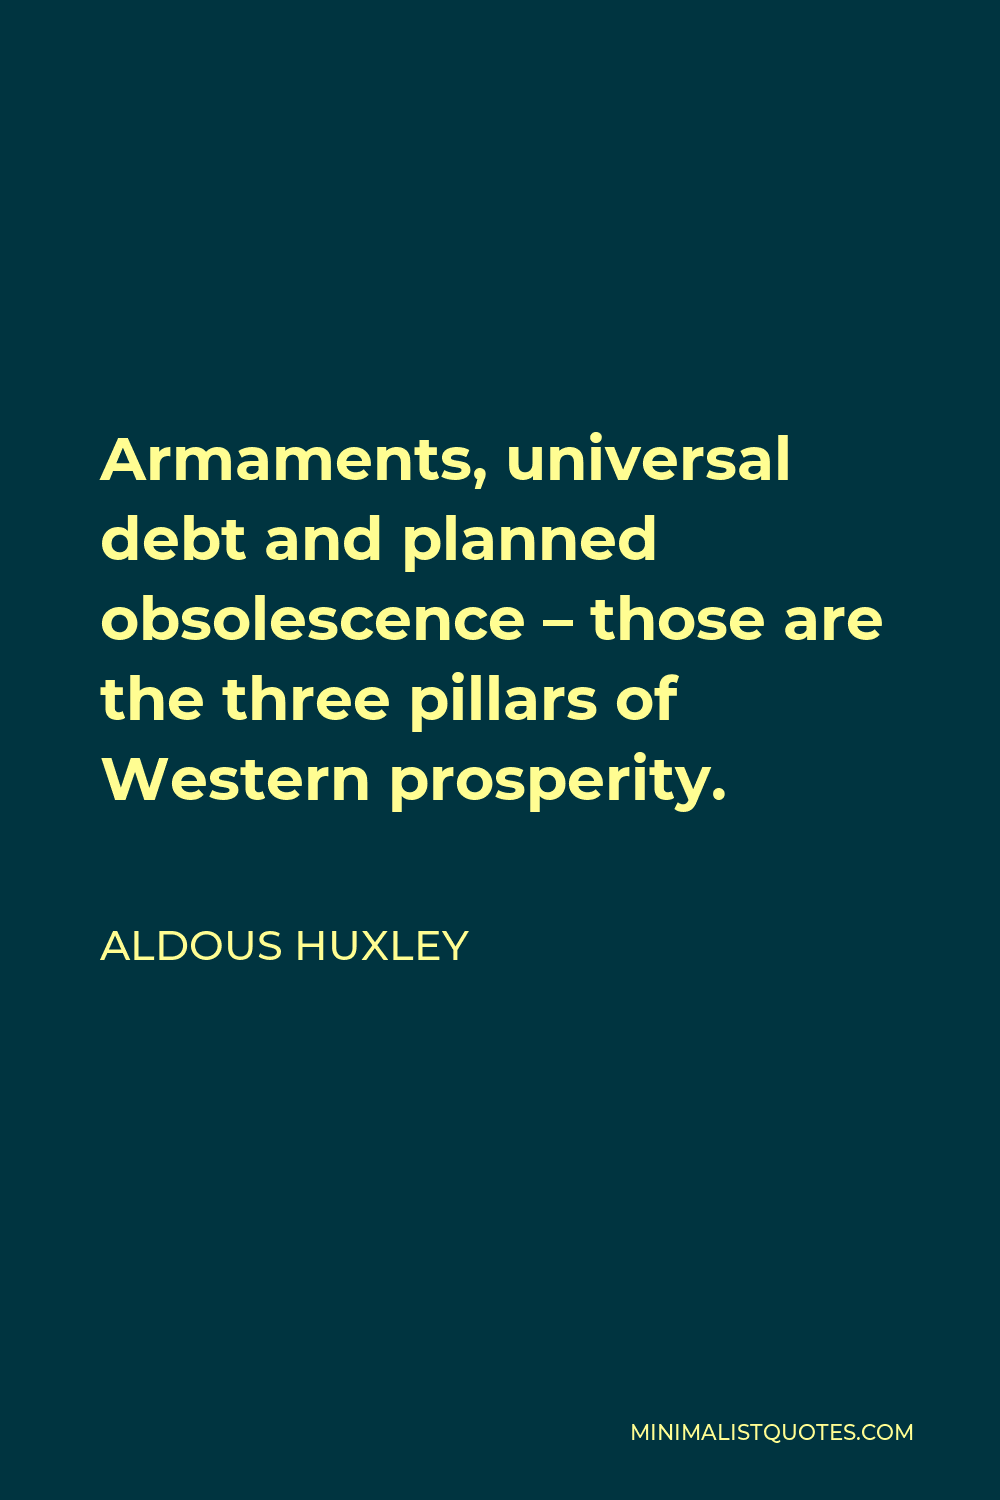 Aldous Huxley Quote - Armaments, universal debt and planned obsolescence – those are the three pillars of Western prosperity.